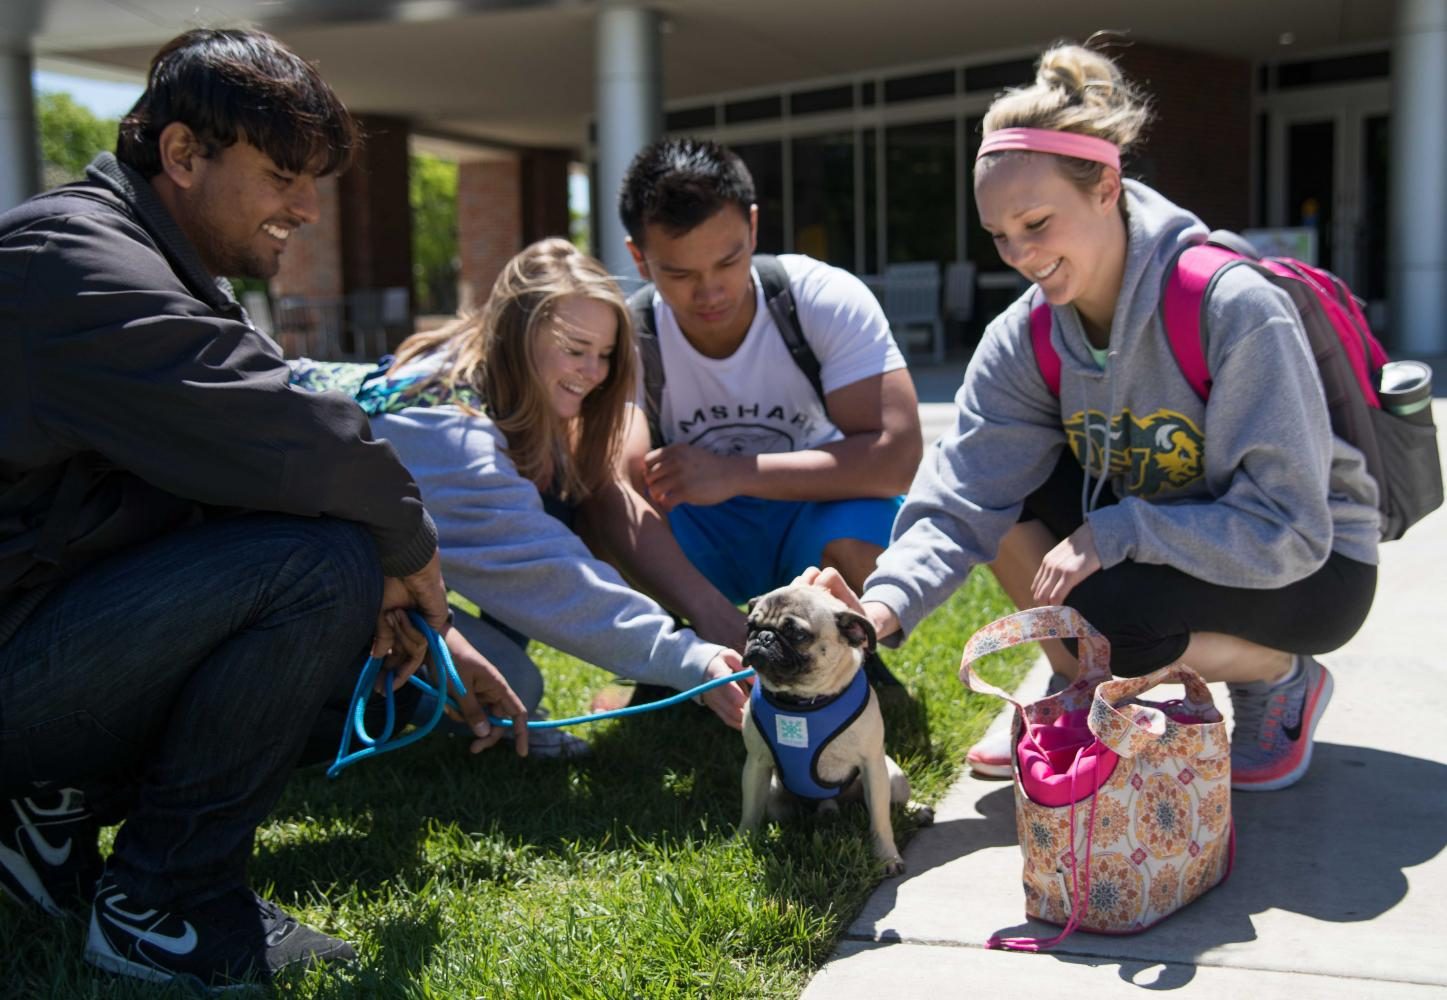 A group of students huddle around a pug during the Pet-A-Pug event held outside the Rhatigan Student Center on Monday from 11-1 p.m. The event is held annually during the spring semester to help students relieve stress before finals. (May 1, 2017)